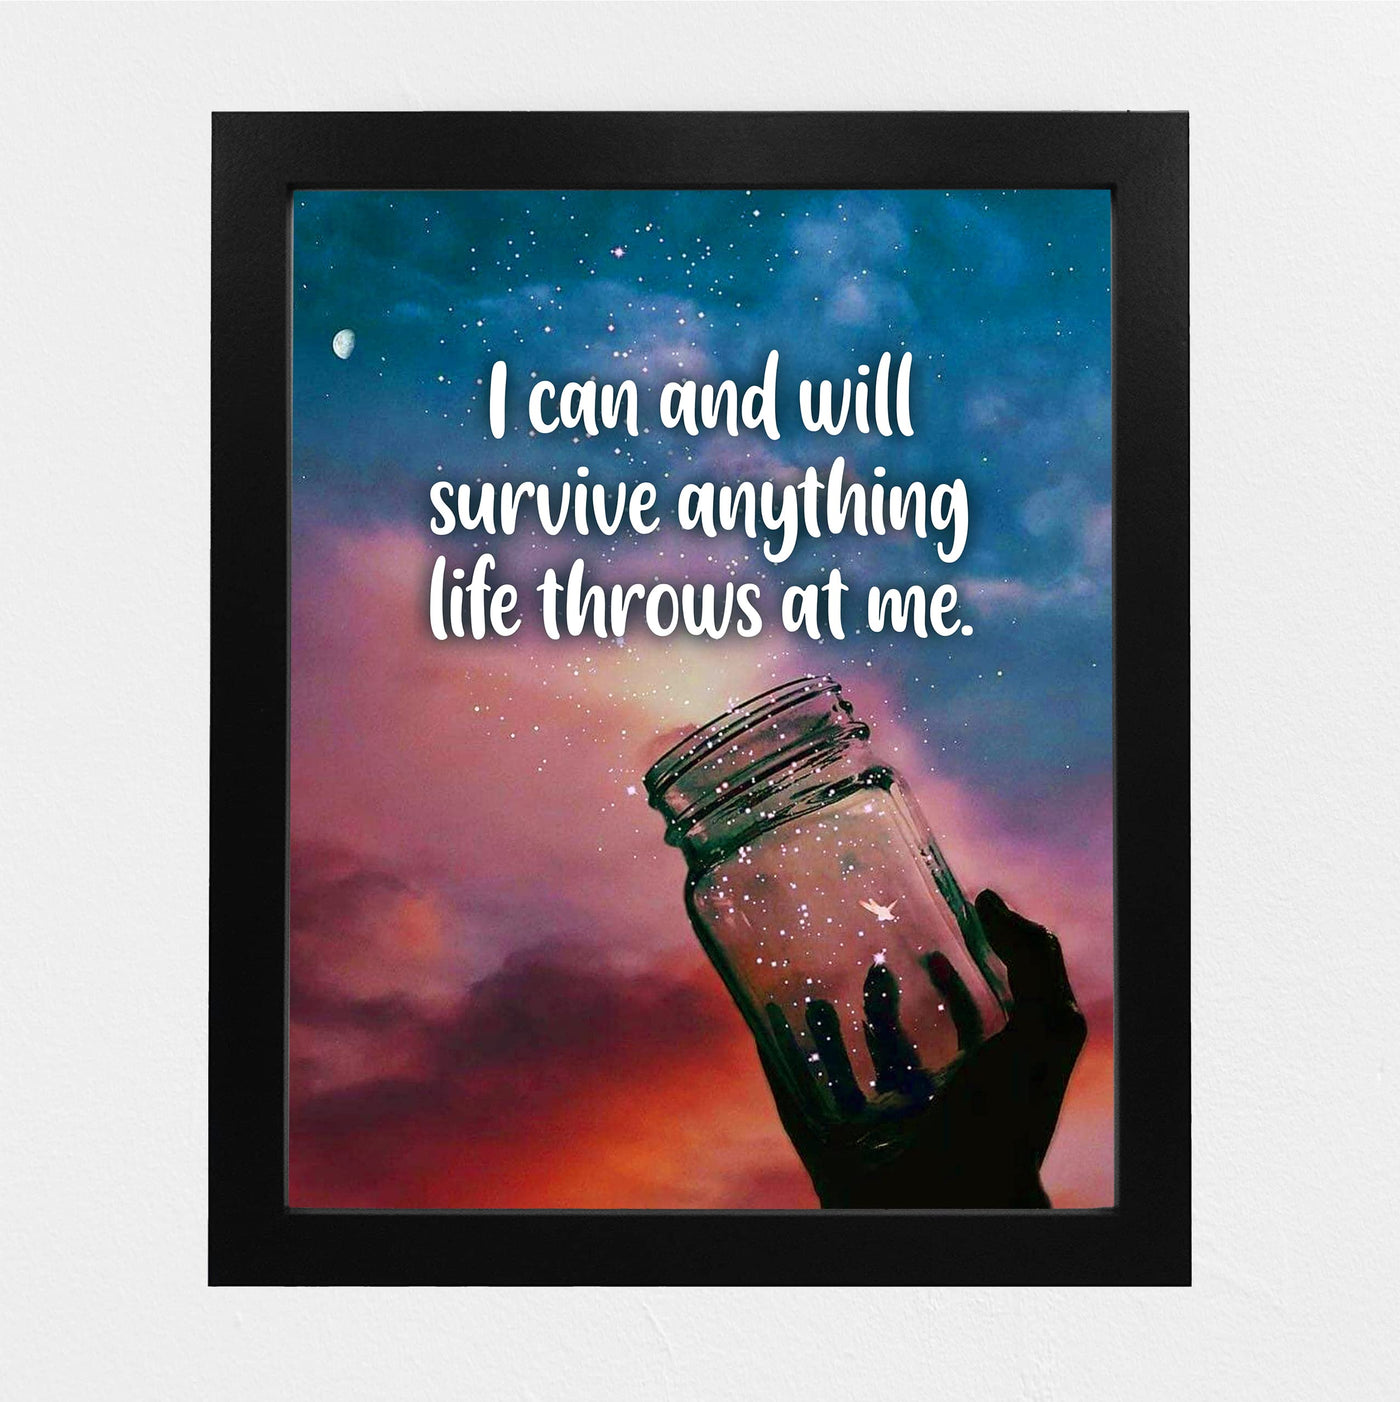 I Will Survive Anything Life Throws At Me-Motivational Quotes Wall Art -8 x 10" Starry Night in Jar Picture Print -Ready to Frame. Inspirational Decor for Home-Office-Classroom. Inspiring Reminder!